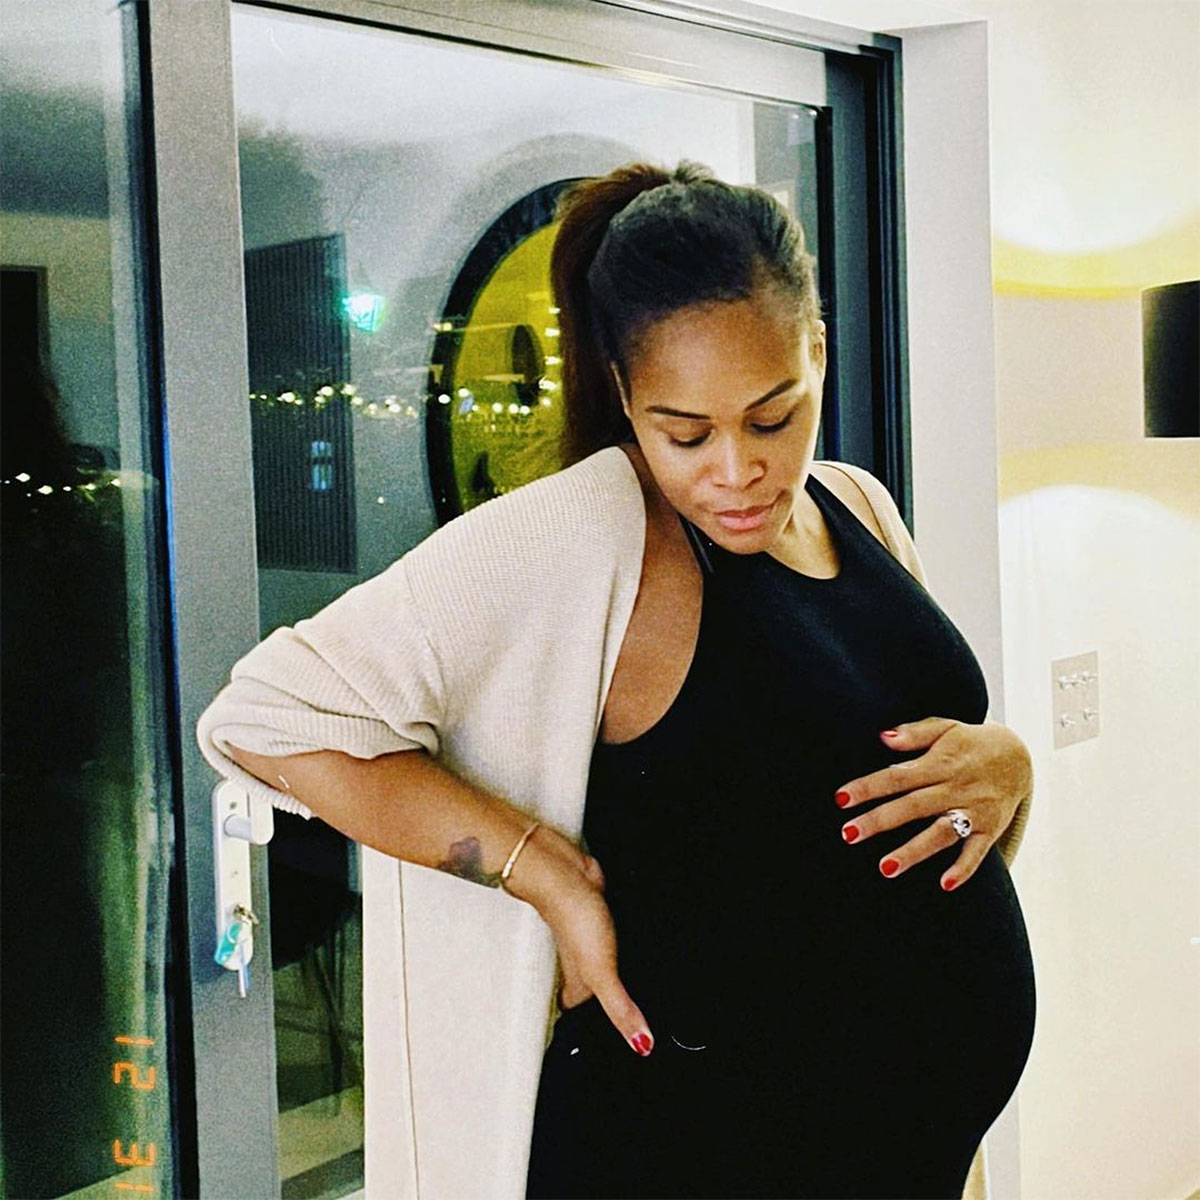 Pregnant Celebrity Videos - Pregnant Celebrities Showing Baby Bumps in 2022: Photos